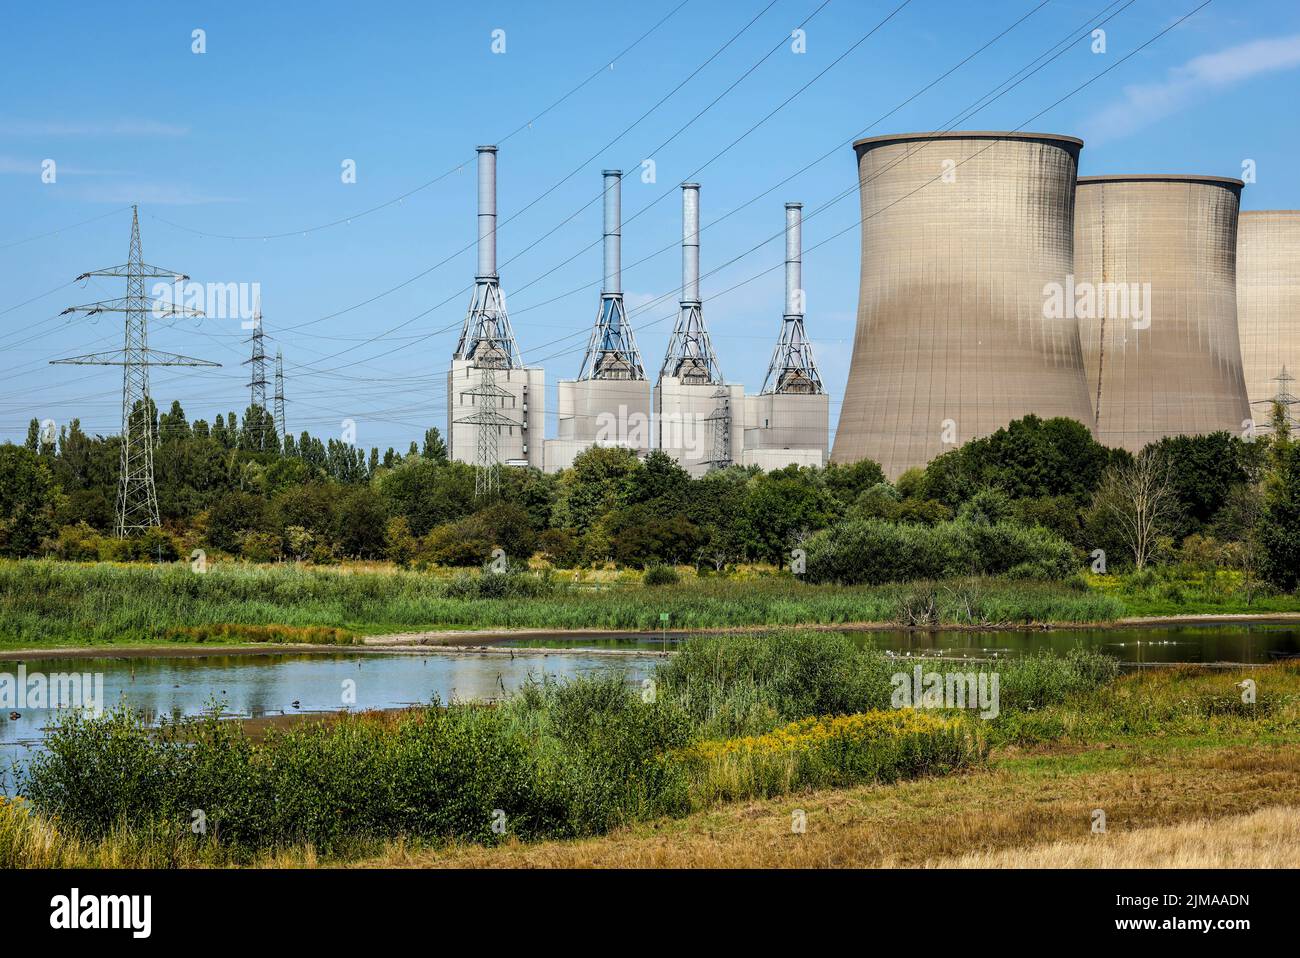 Werne, North Rhine-Westphalia, Germany - Natural gas power plant, steam power plant, RWE Generation SE Gersteinwerk power plant. Combined cycle, gas a Stock Photo